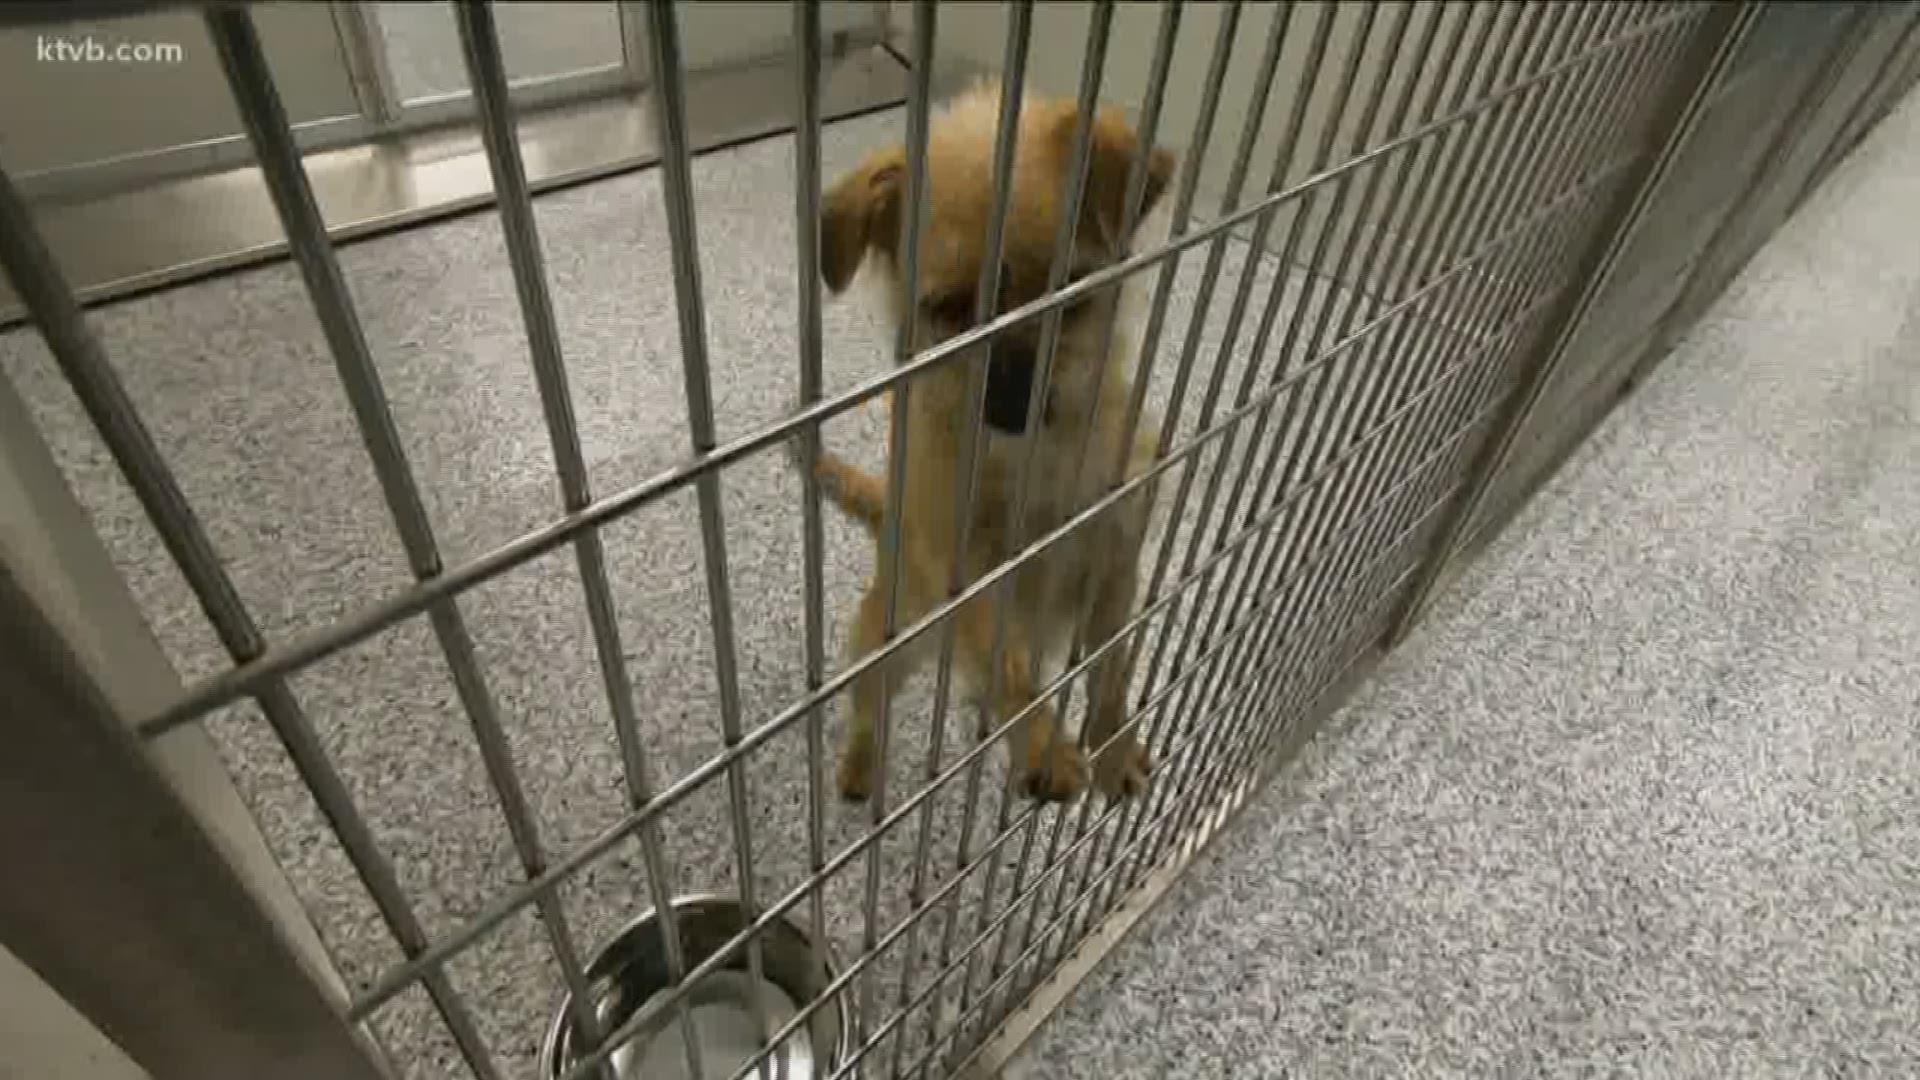 If you are thinking about adopting a pet, the Idaho Humane Society has a few things it wants you to consider.